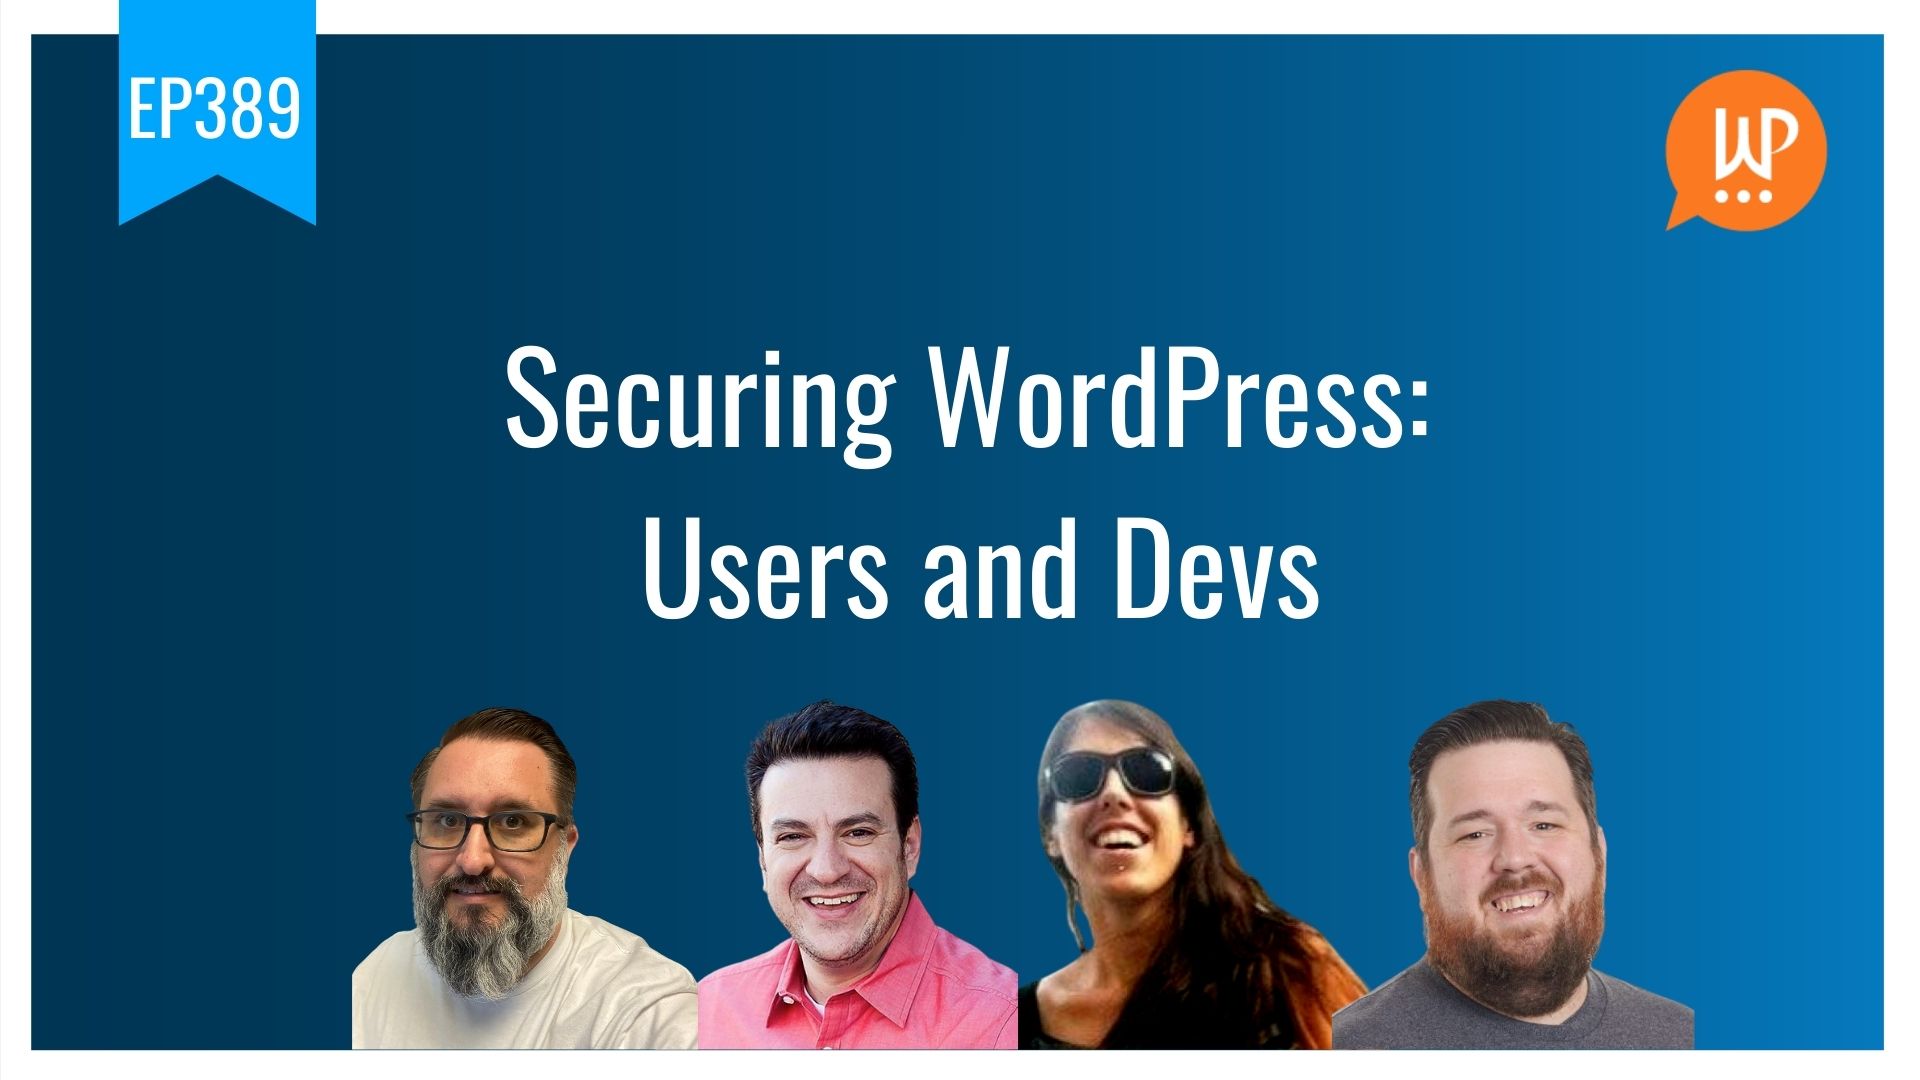 EP389 – Securing WordPress Users and Devs